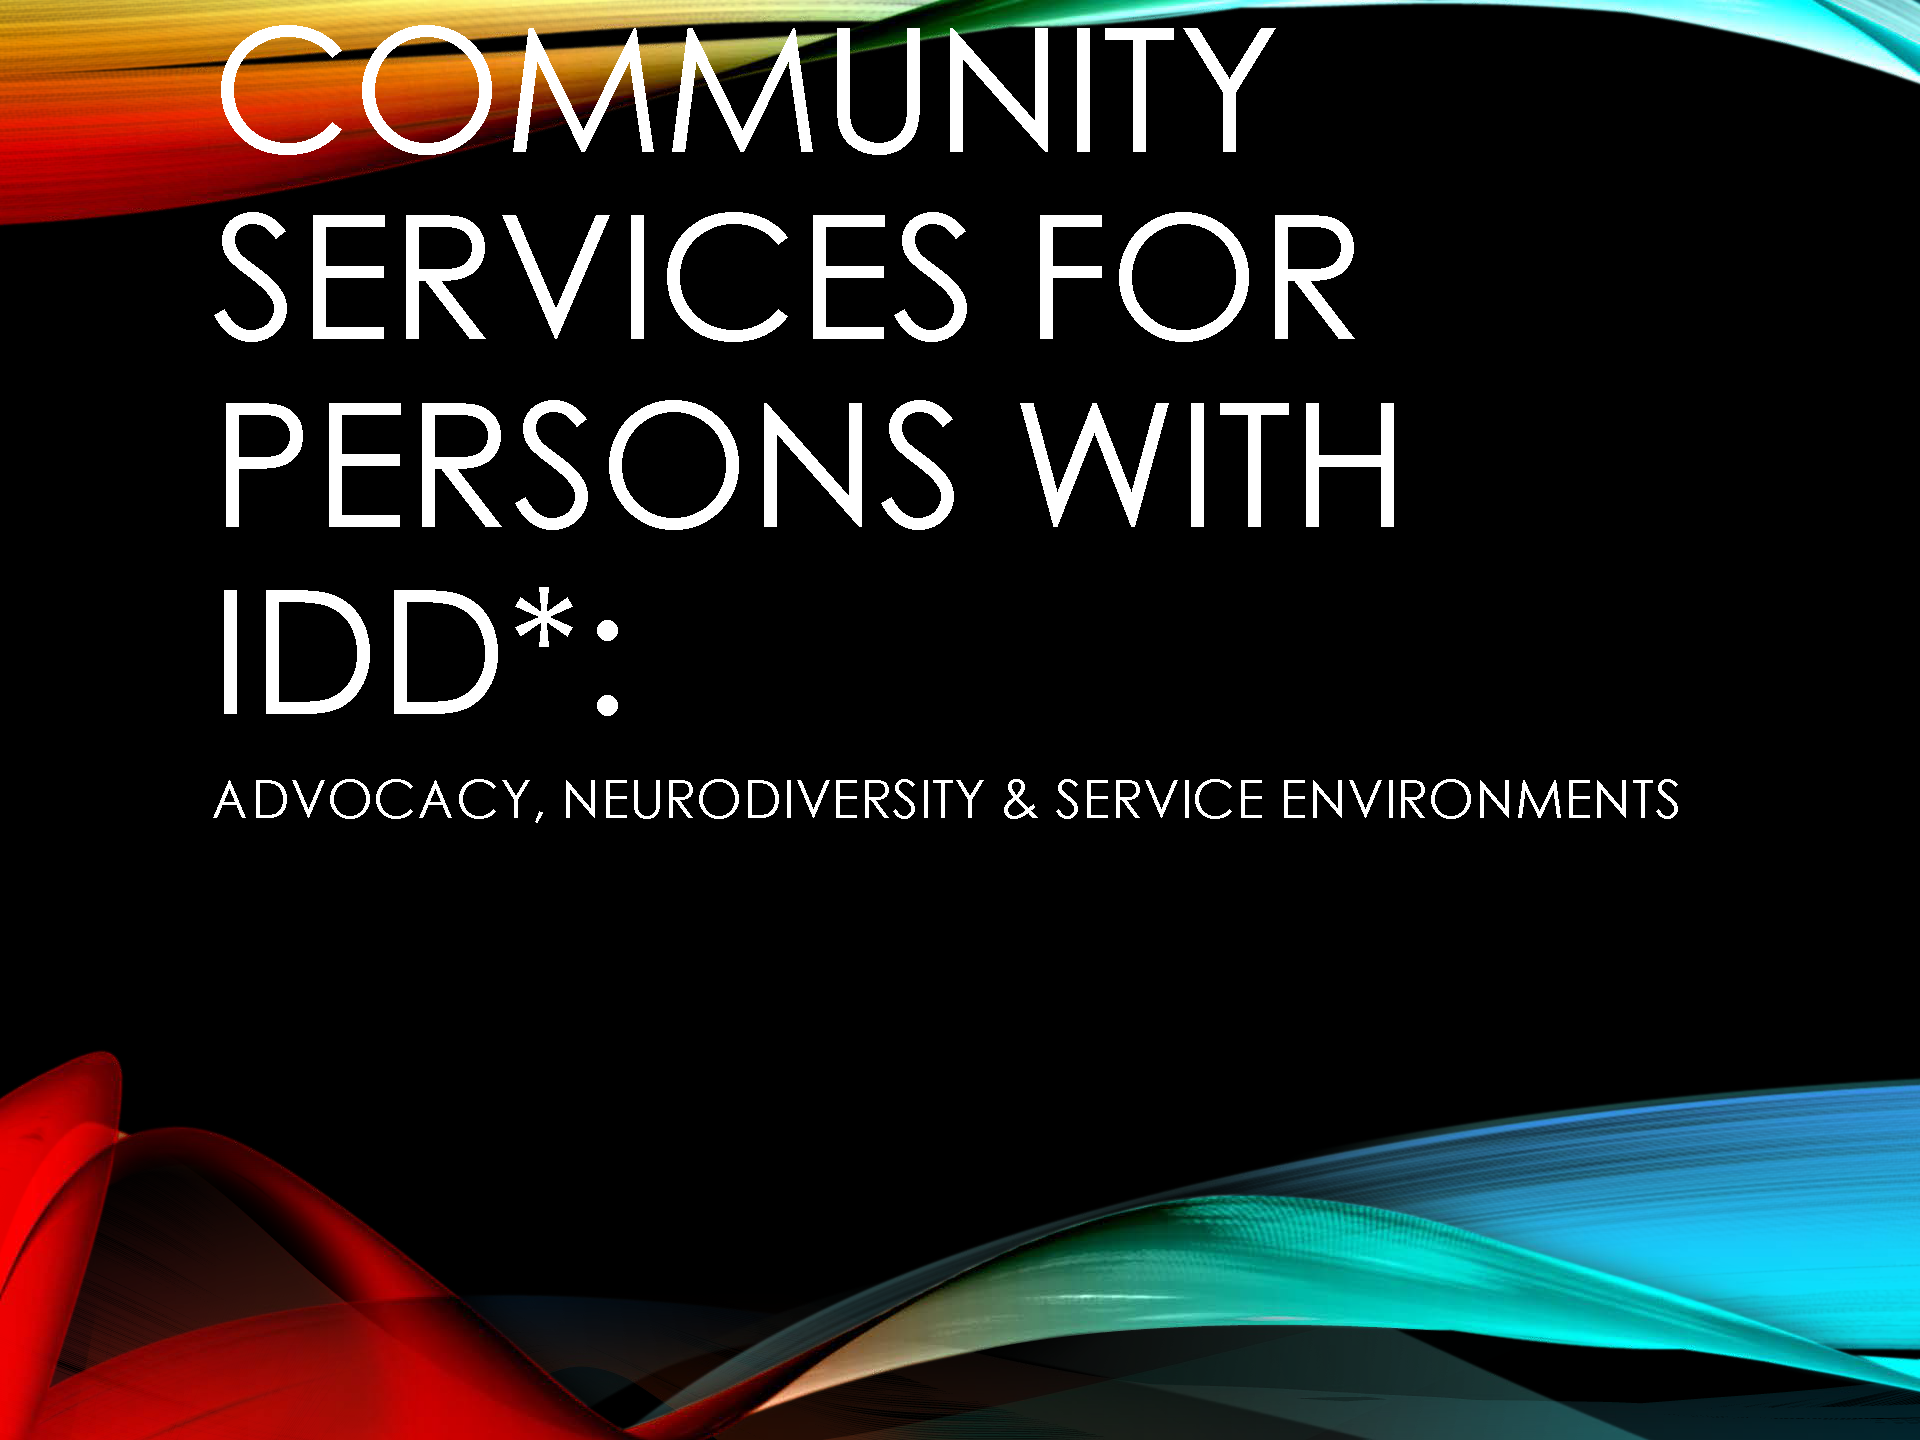 COMMUNITY SERVICES FOR PERSONS WITH IDD.ADVOCACY NEURODIVERSITY SERVICE ENVIRONMENTS_Page_01